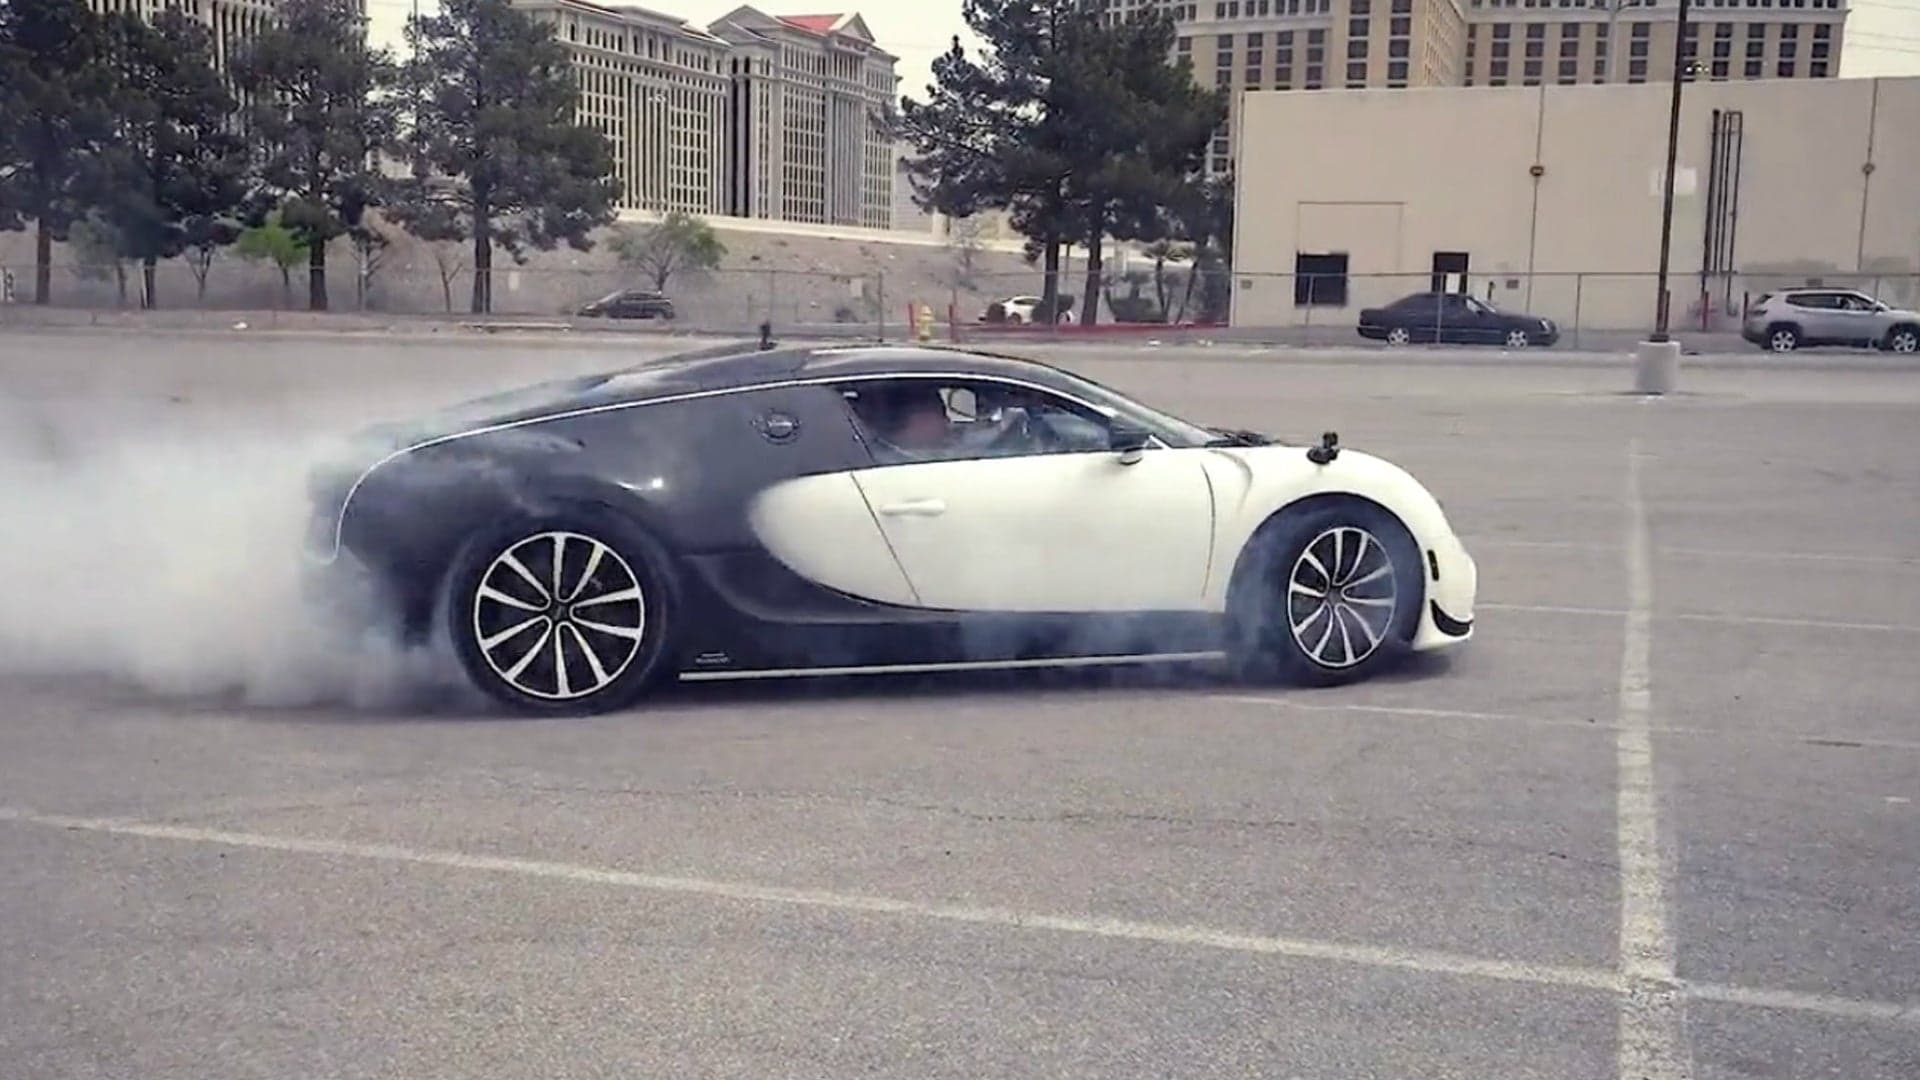 Mansory Edition Bugatti Veyron’s Drifts and Donuts Could Cost $150,000